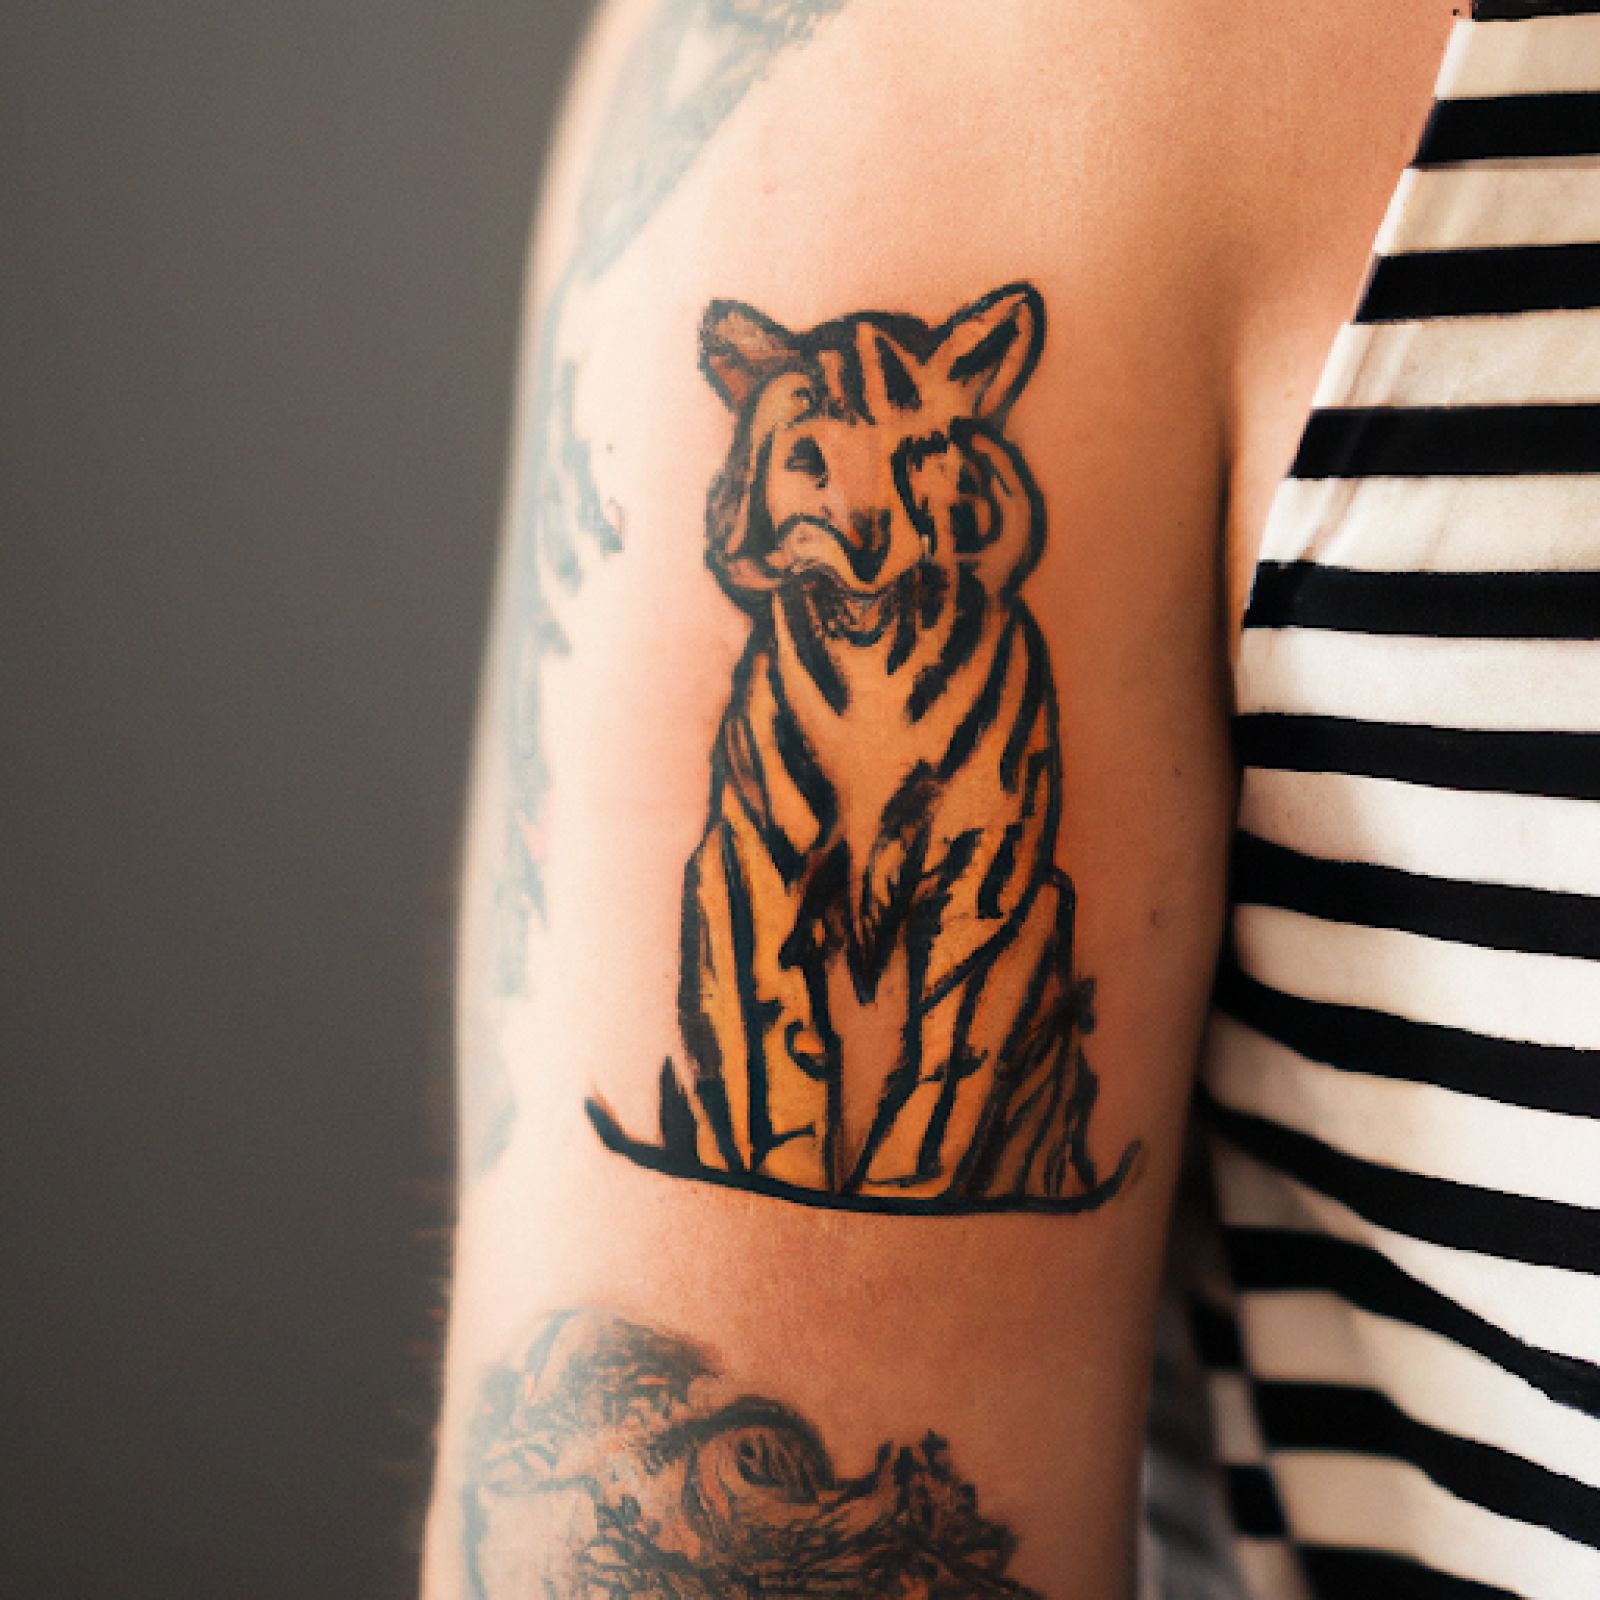 Tiger tattoo on chest for men